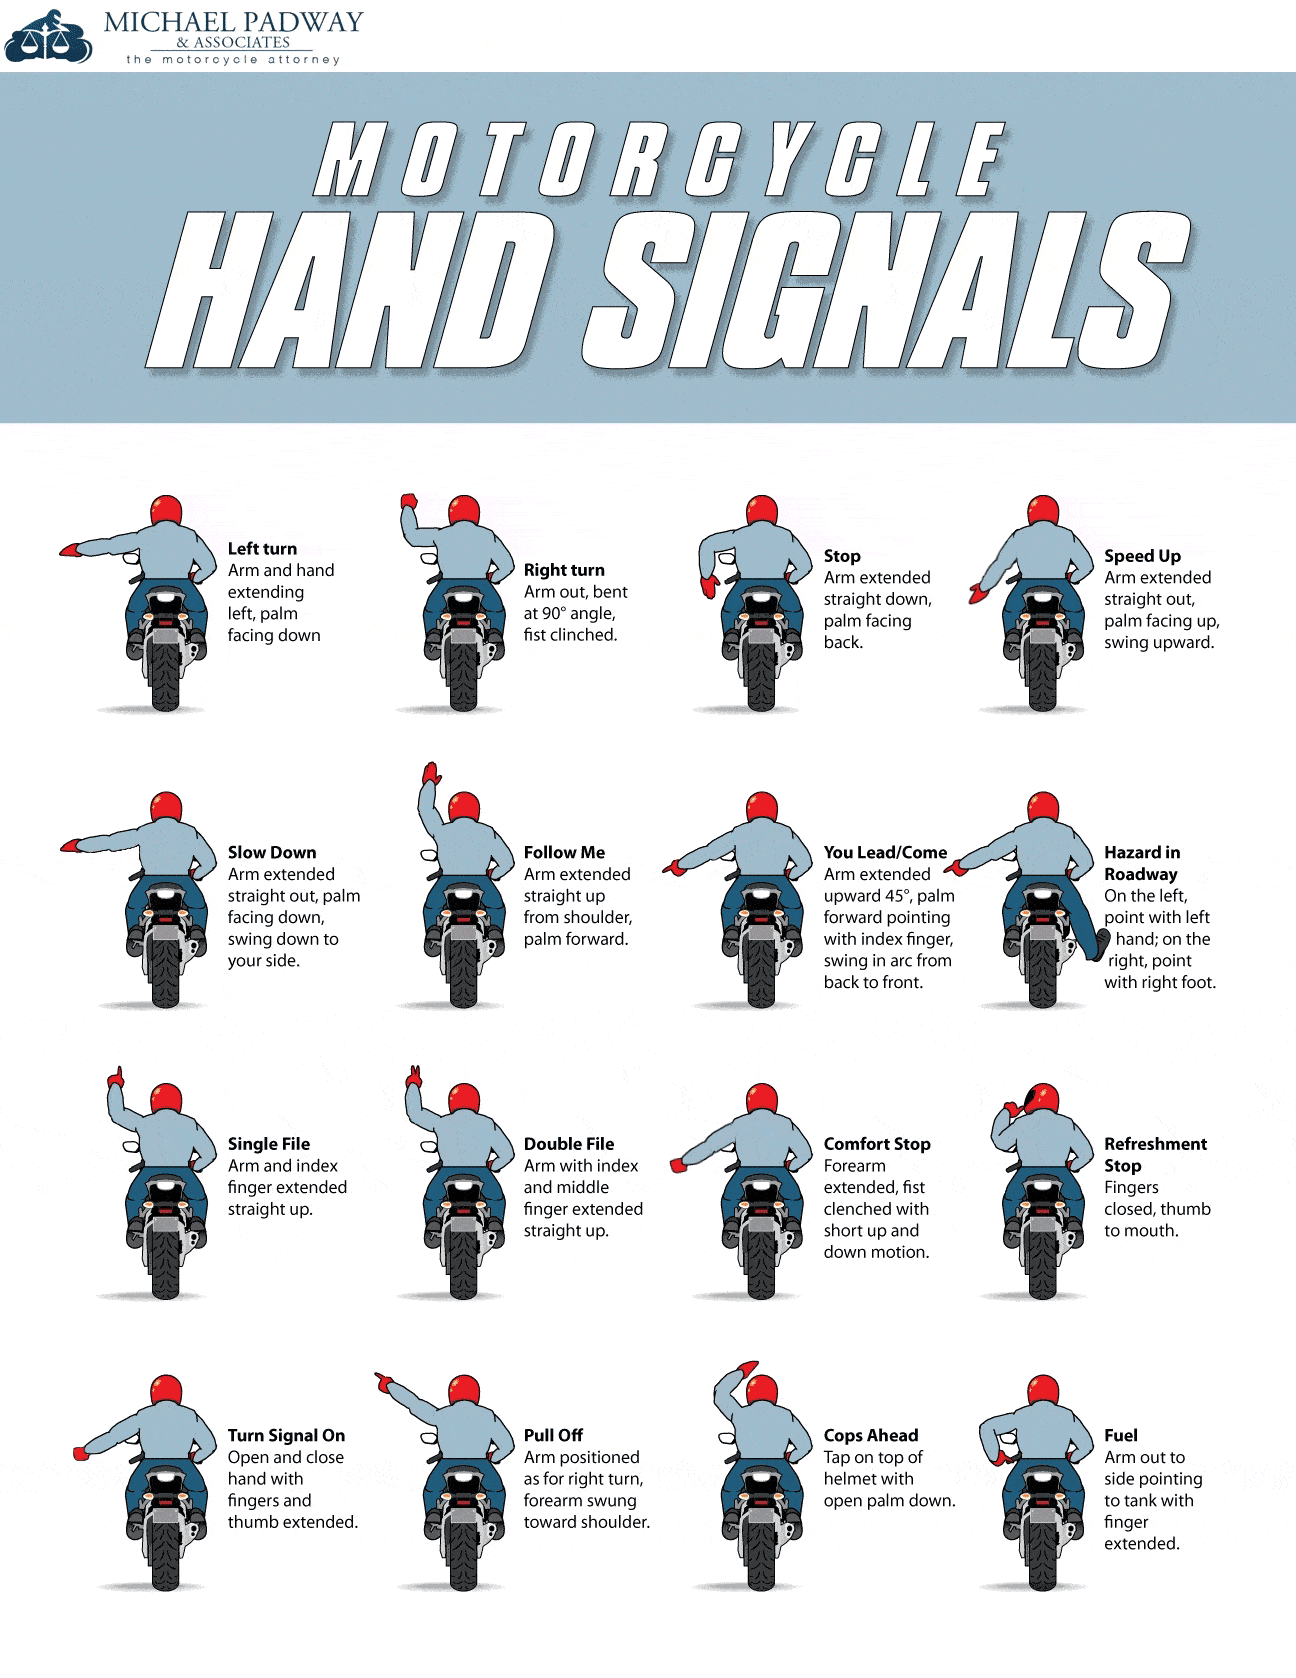 16 Motorcycle Hand Signals for Group Riding